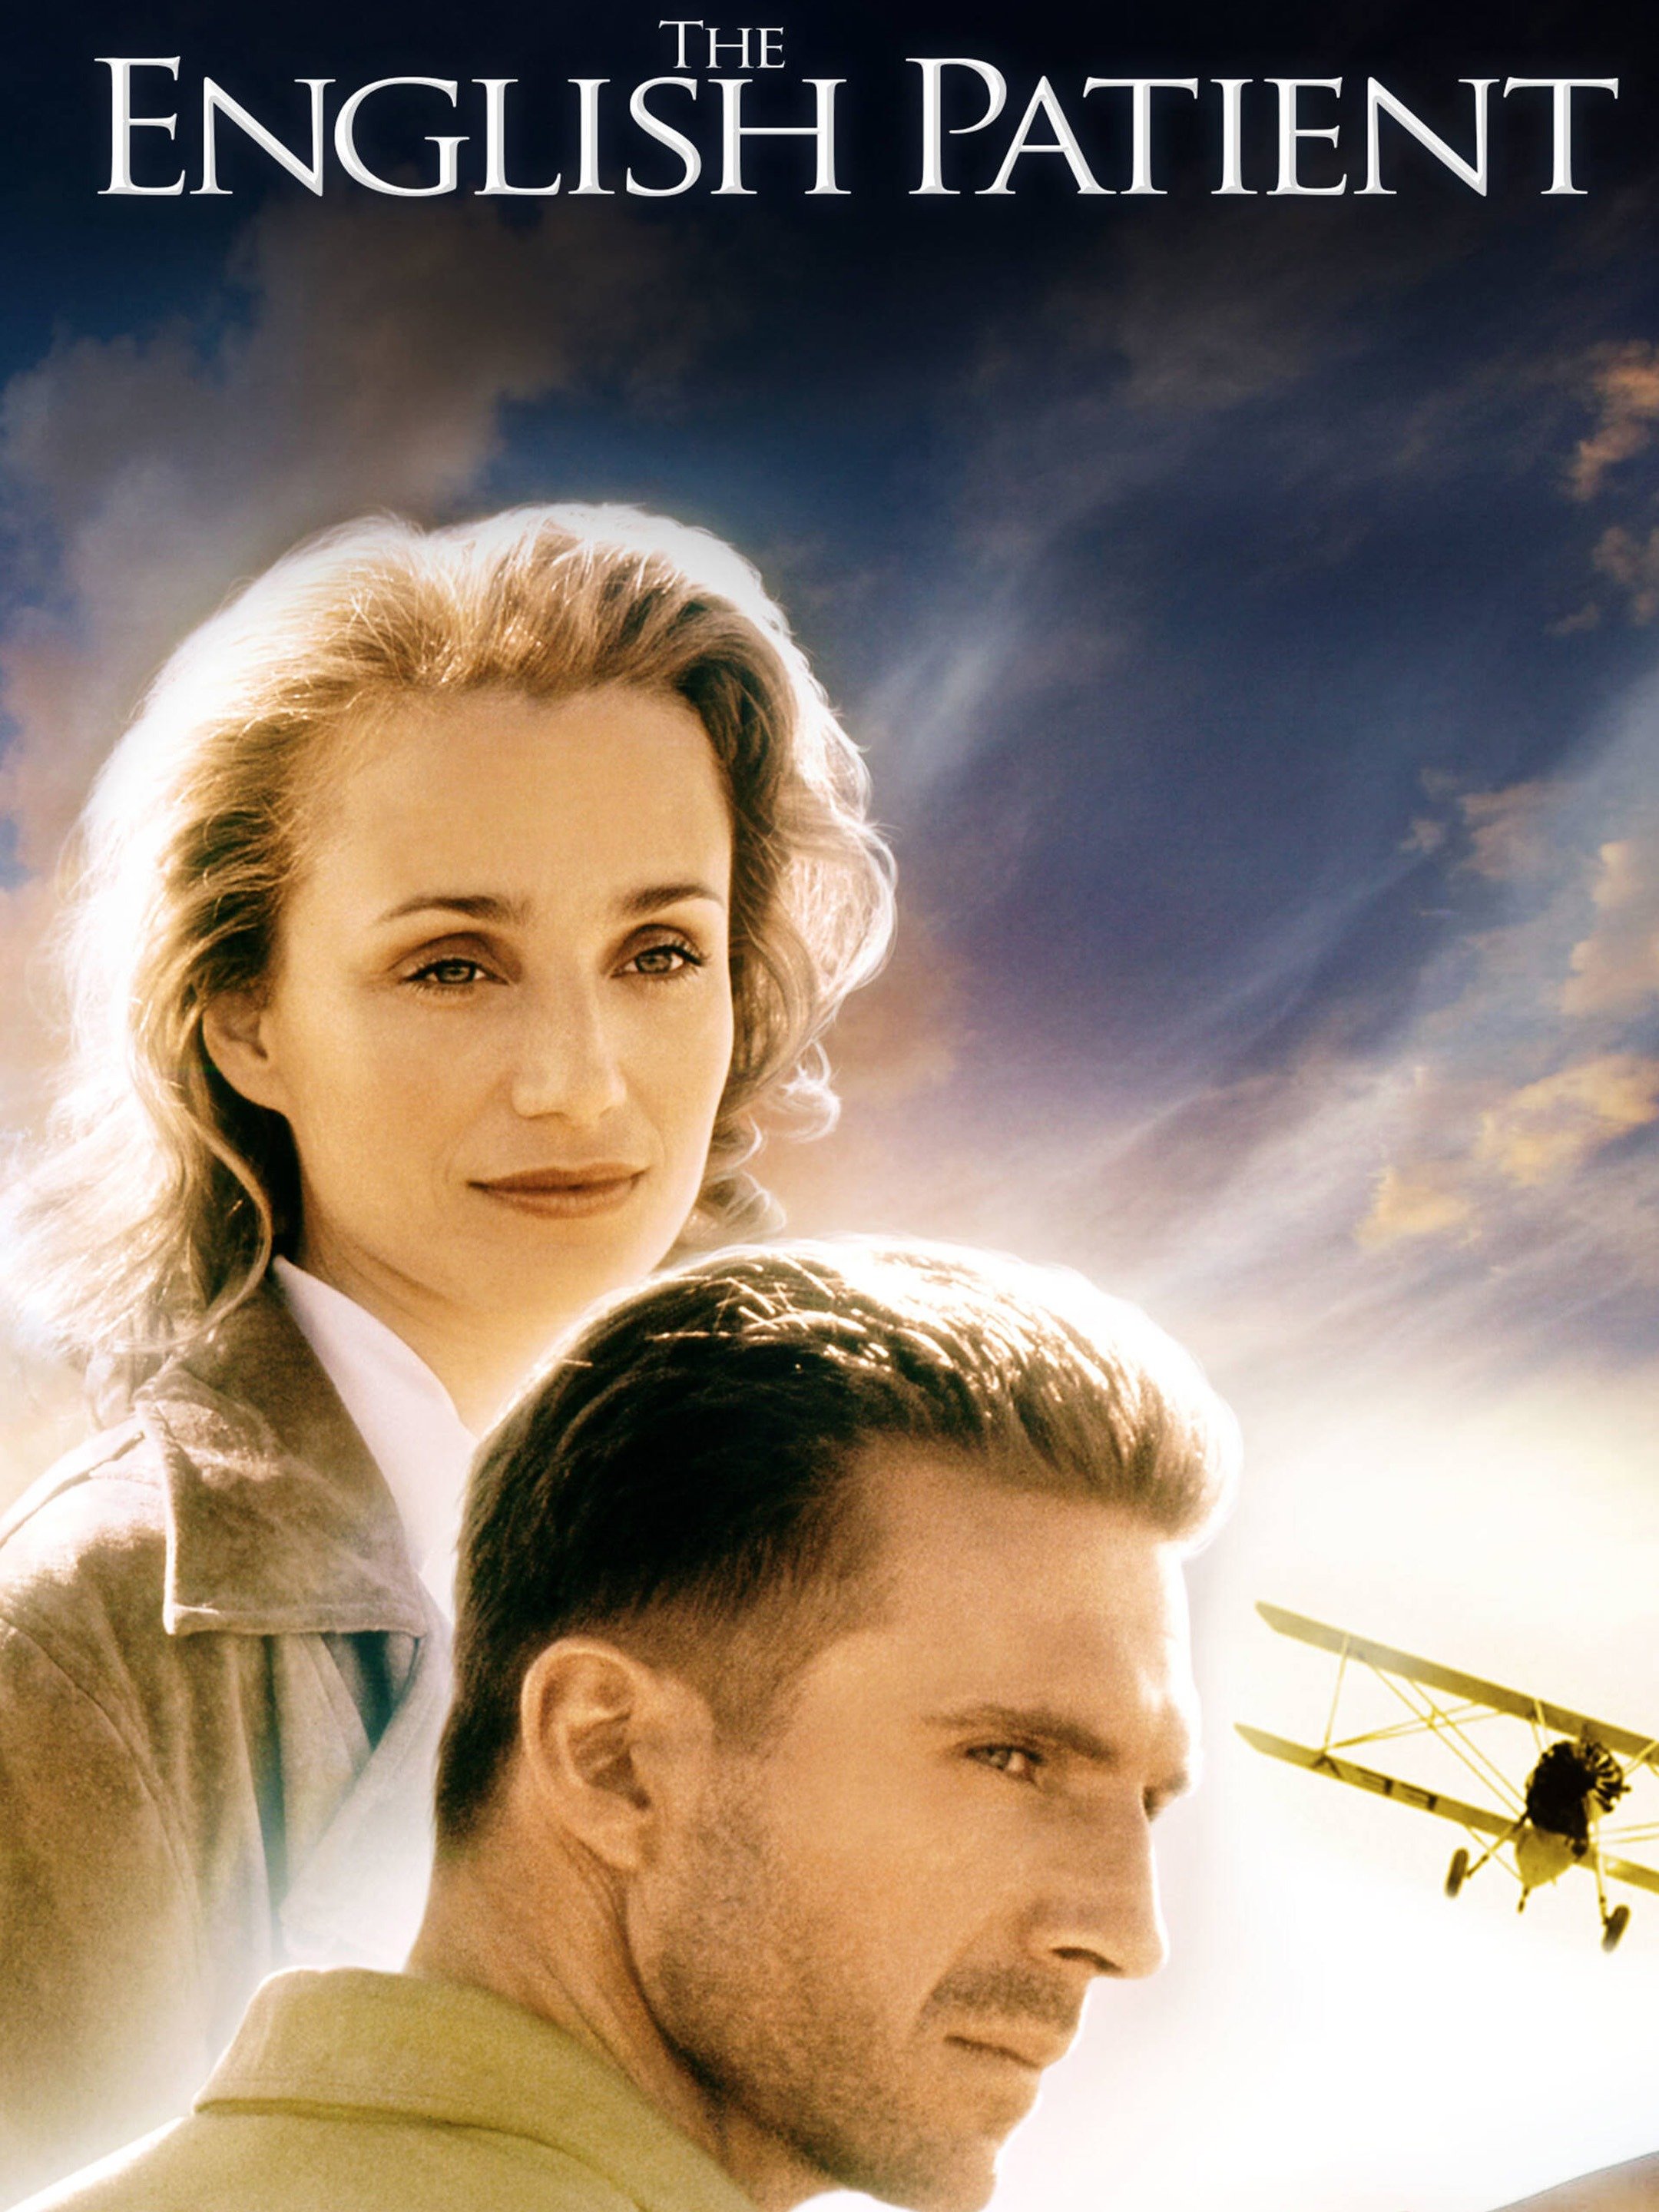 english patient movie review